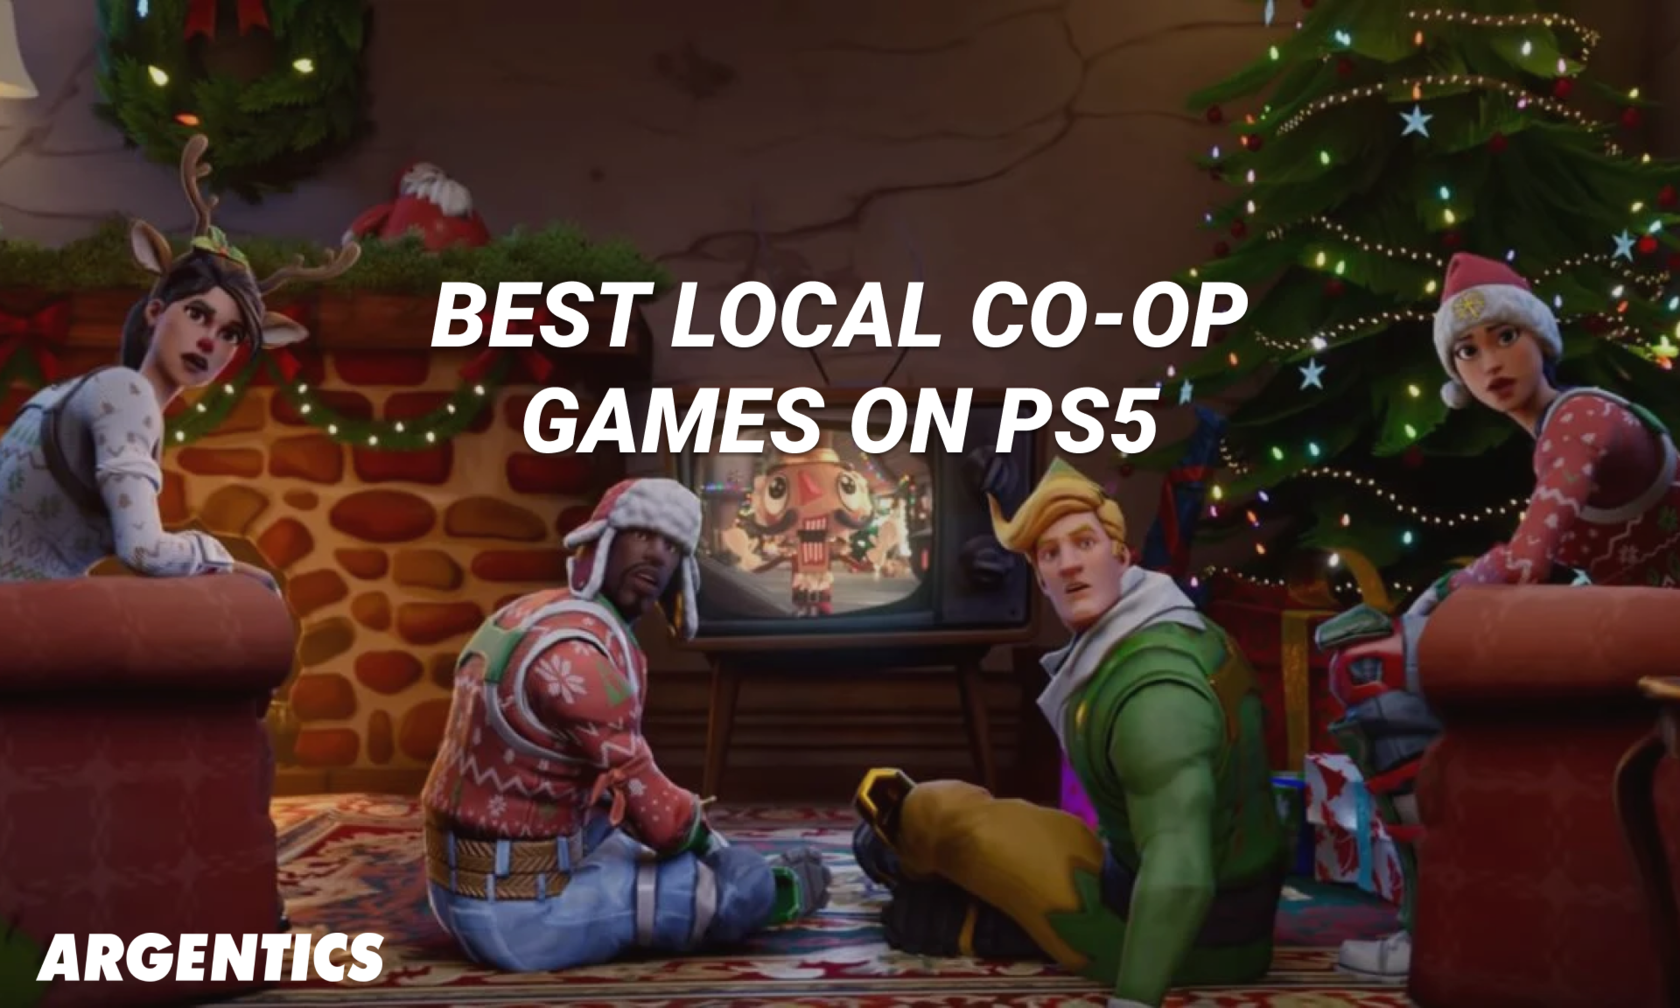 The Best Couch Co-op Games on PS5 To Play With Friends and Family